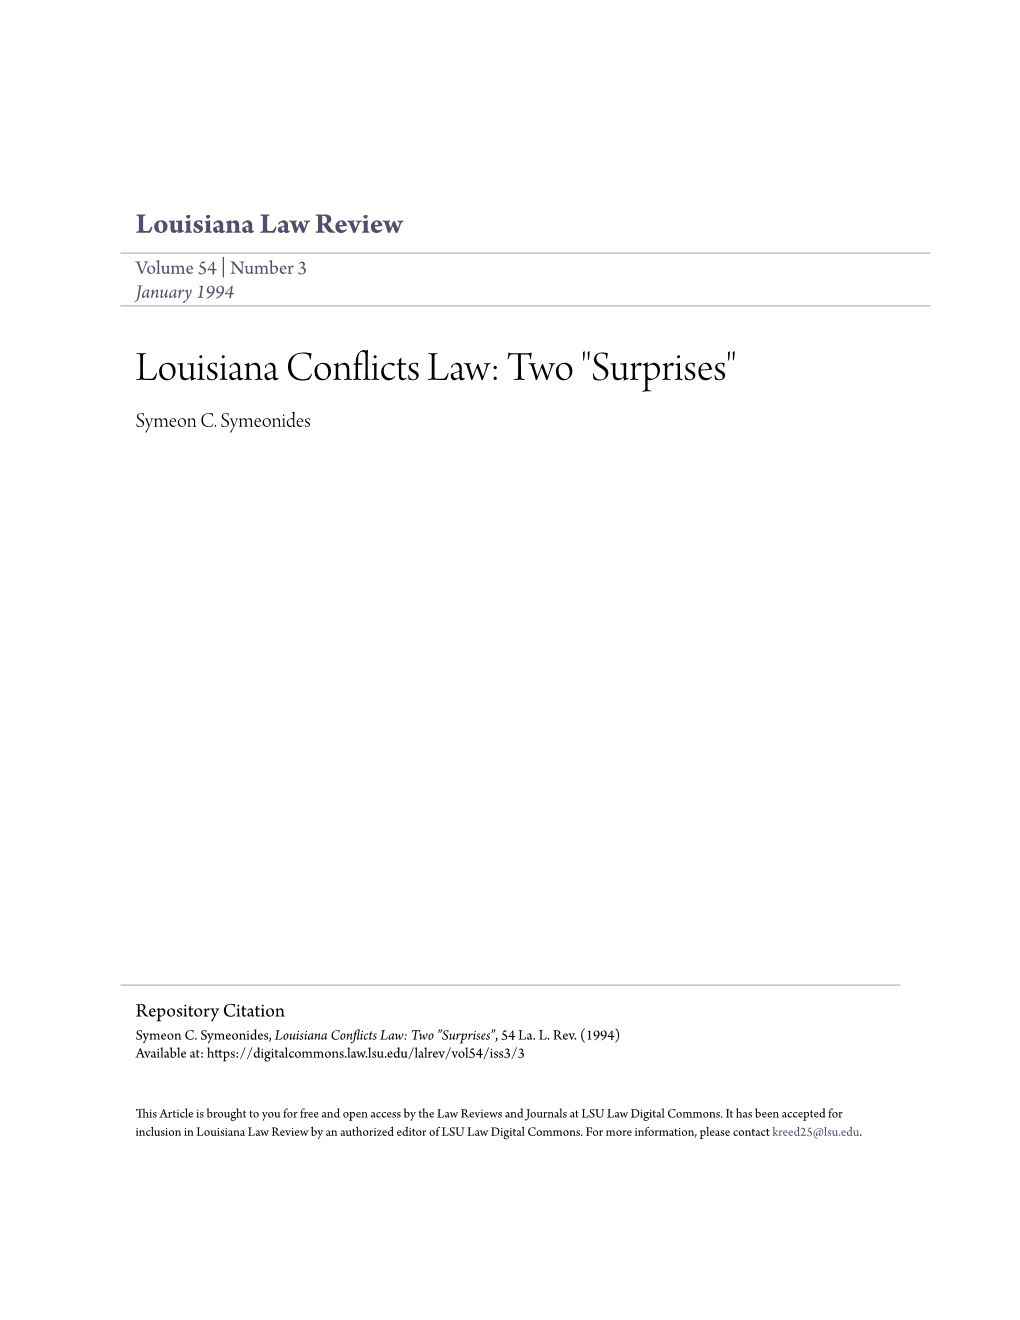 Louisiana Conflicts Law: Two "Surprises" Symeon C